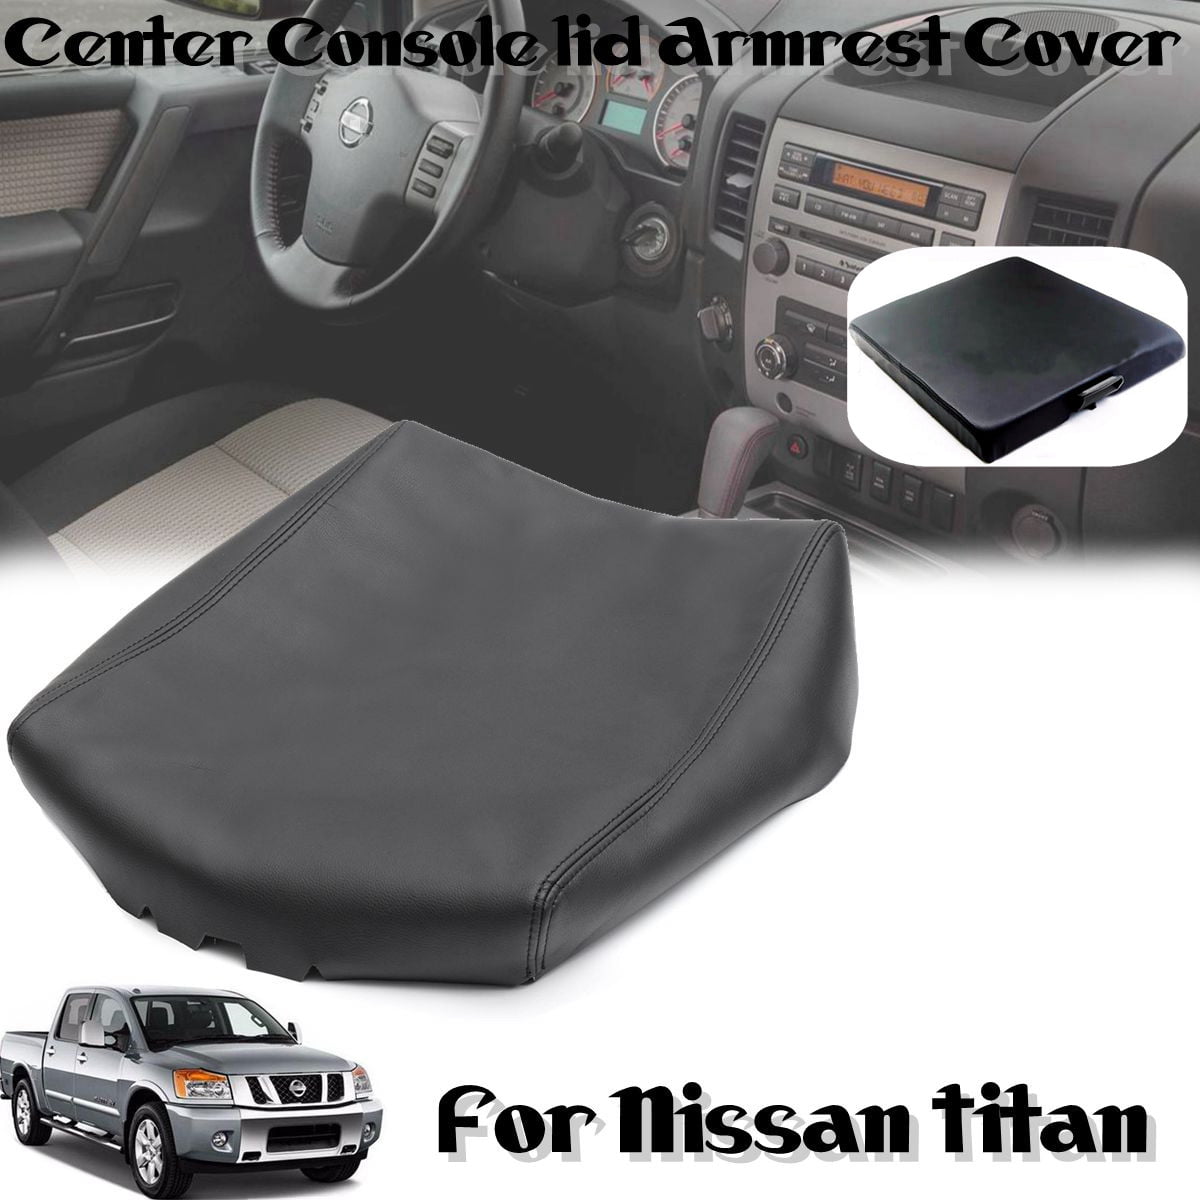 Fabric Black Center Console Lid Armrest Protection Cover Fits 04-14 Nissan Titan